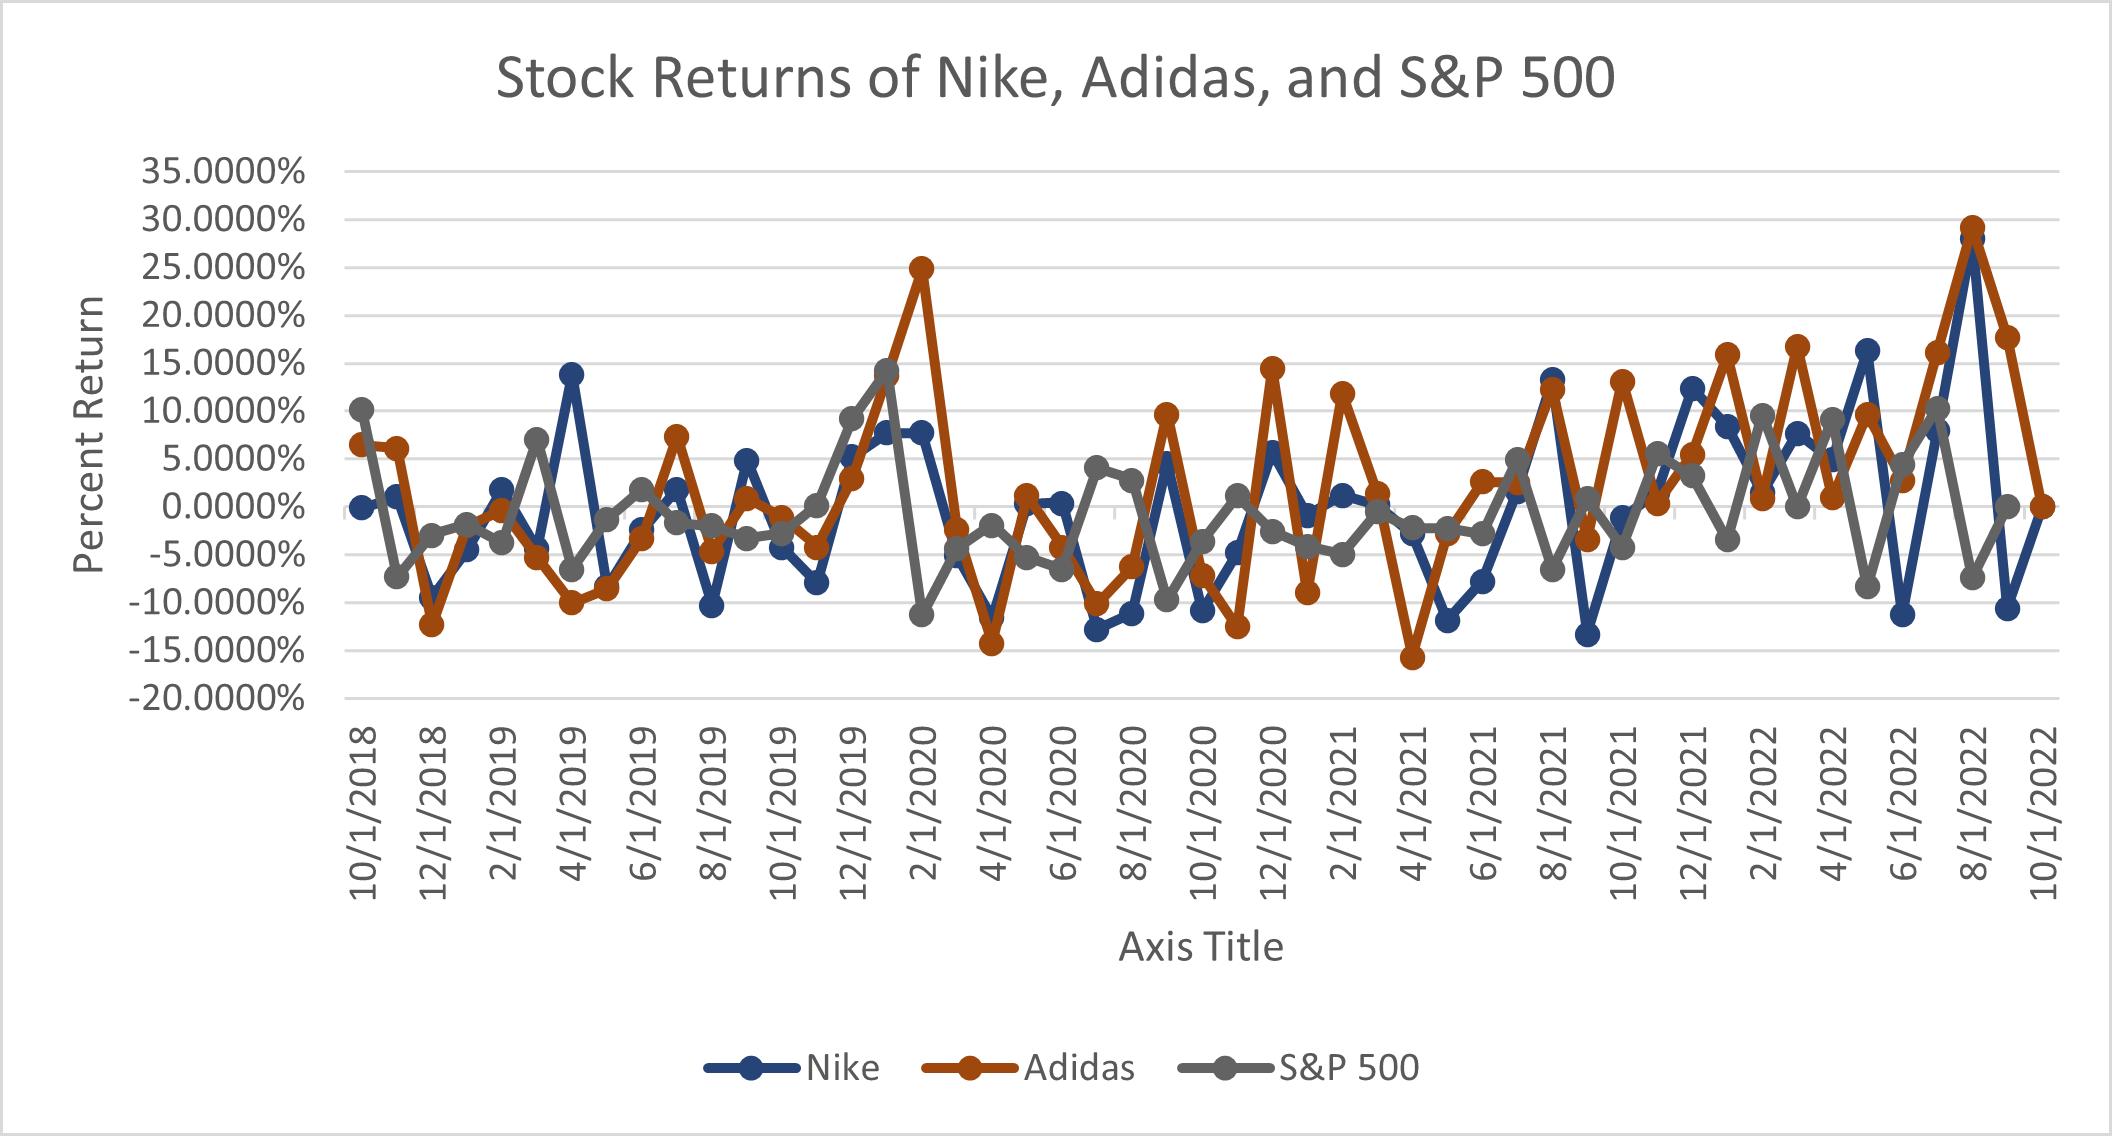 Stock Returns of Nike, Adidas, and S&P 500